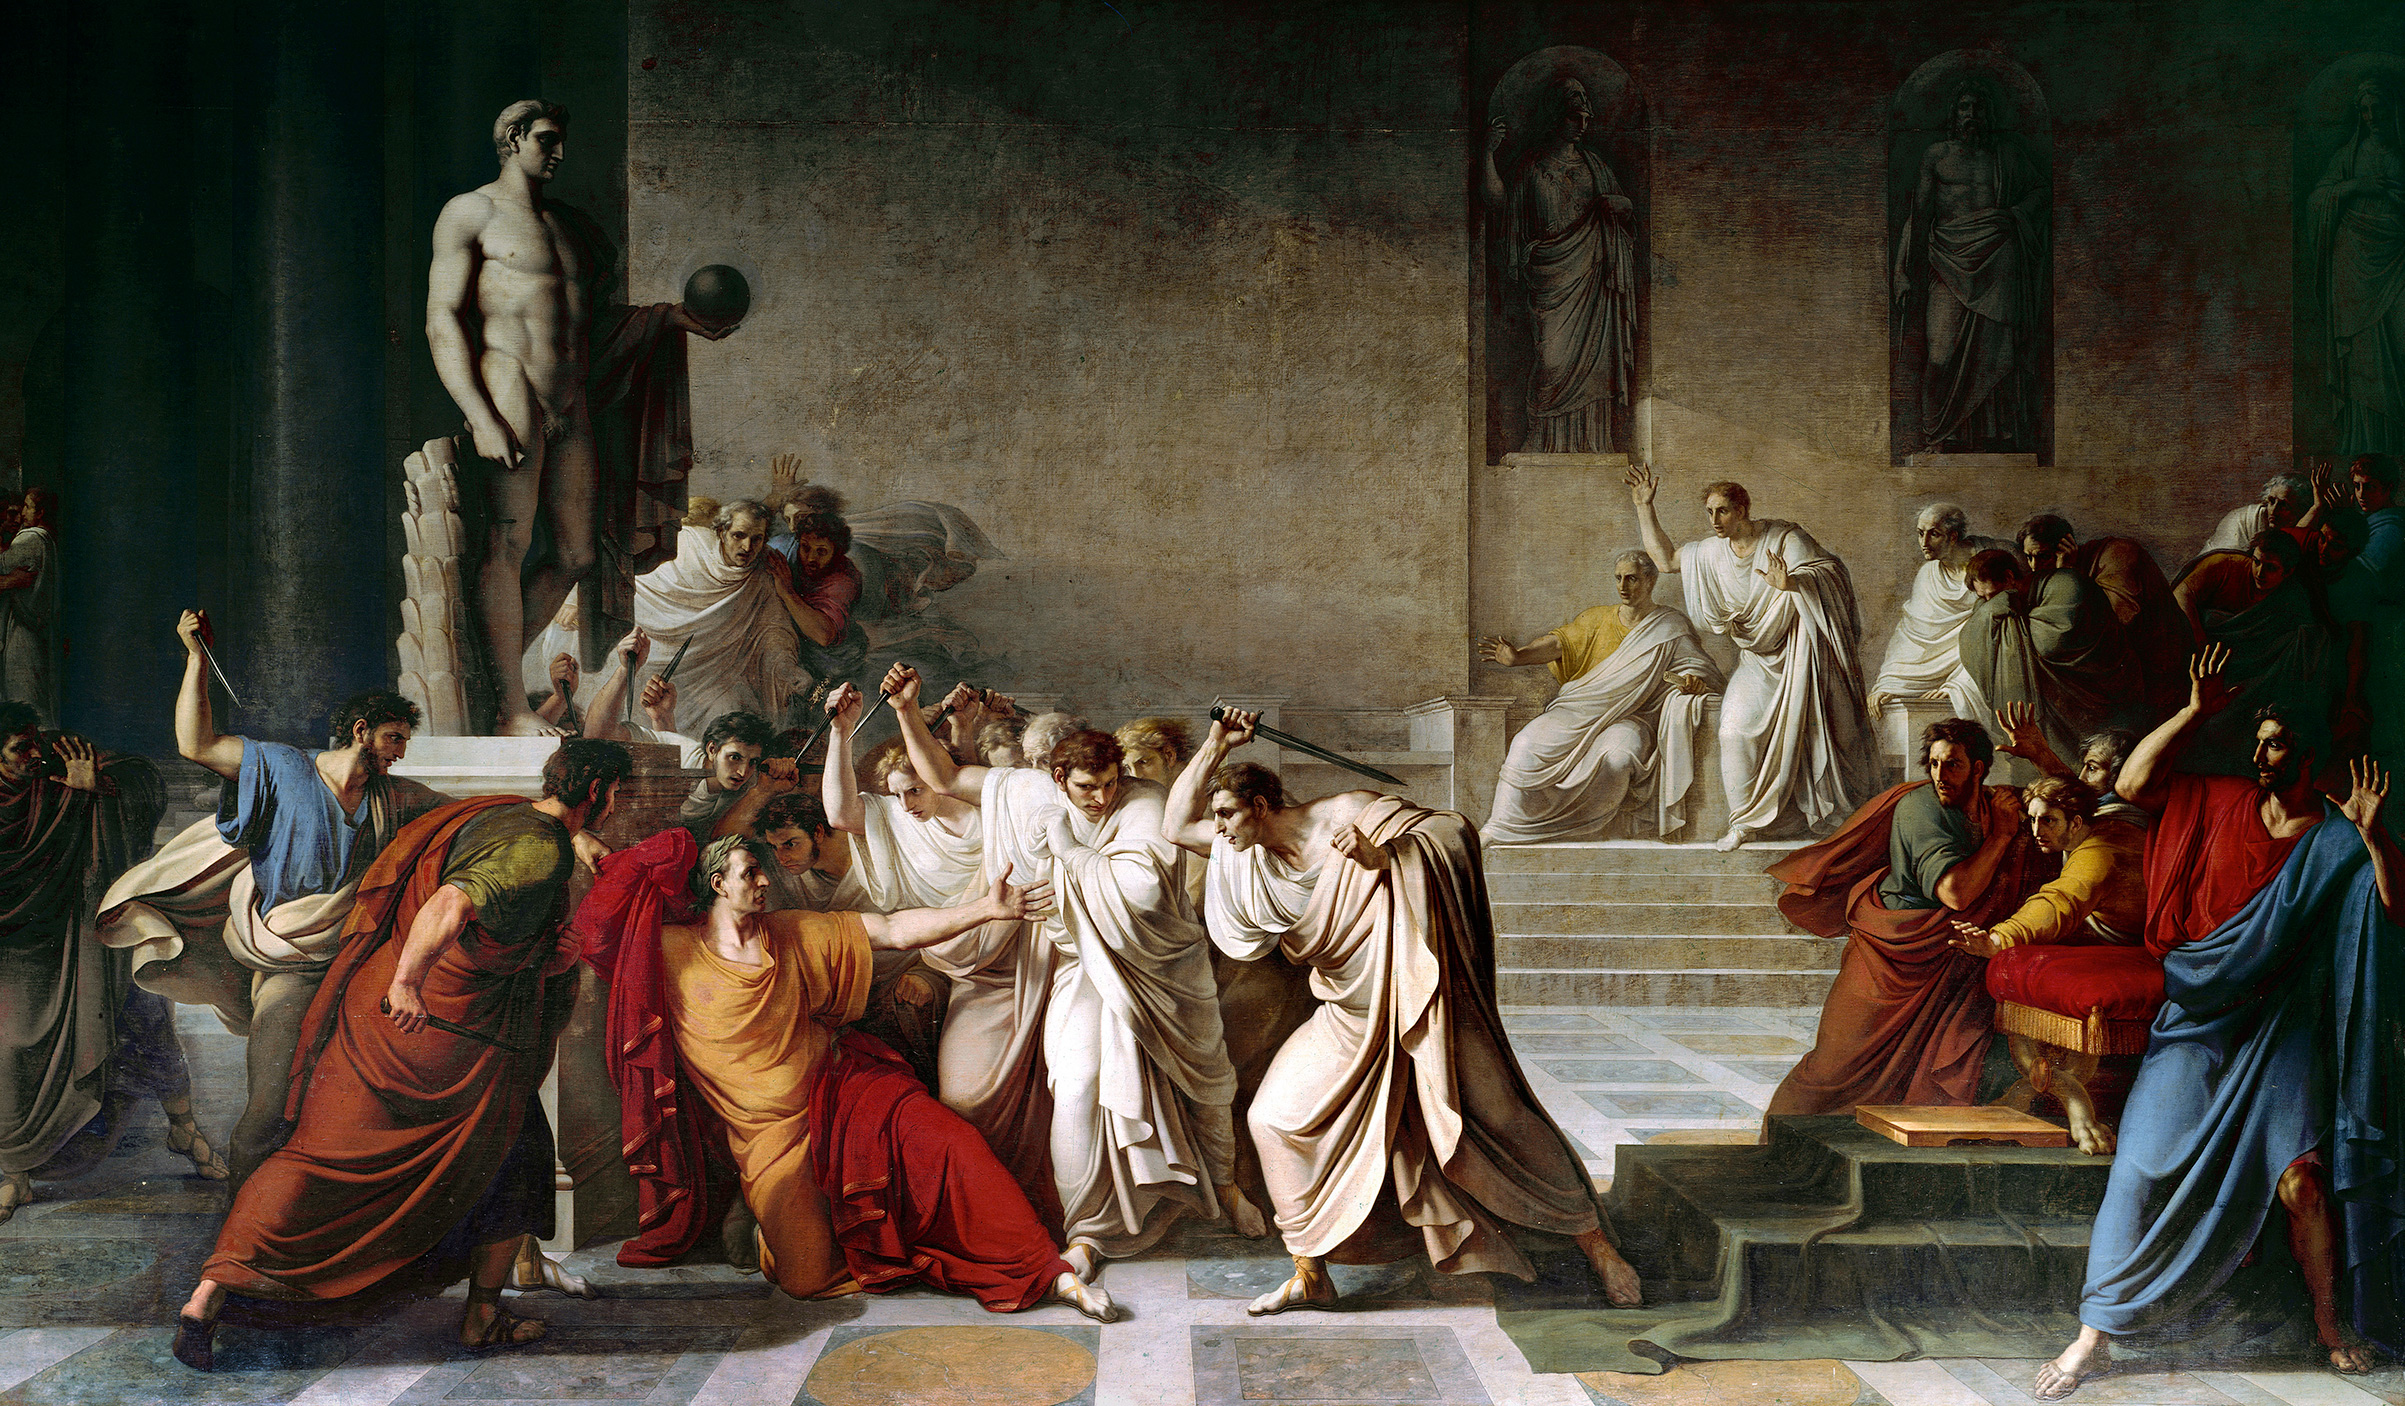 Vincenzo Camuccini, The Death of Caesar, 1798 (Getty Images)